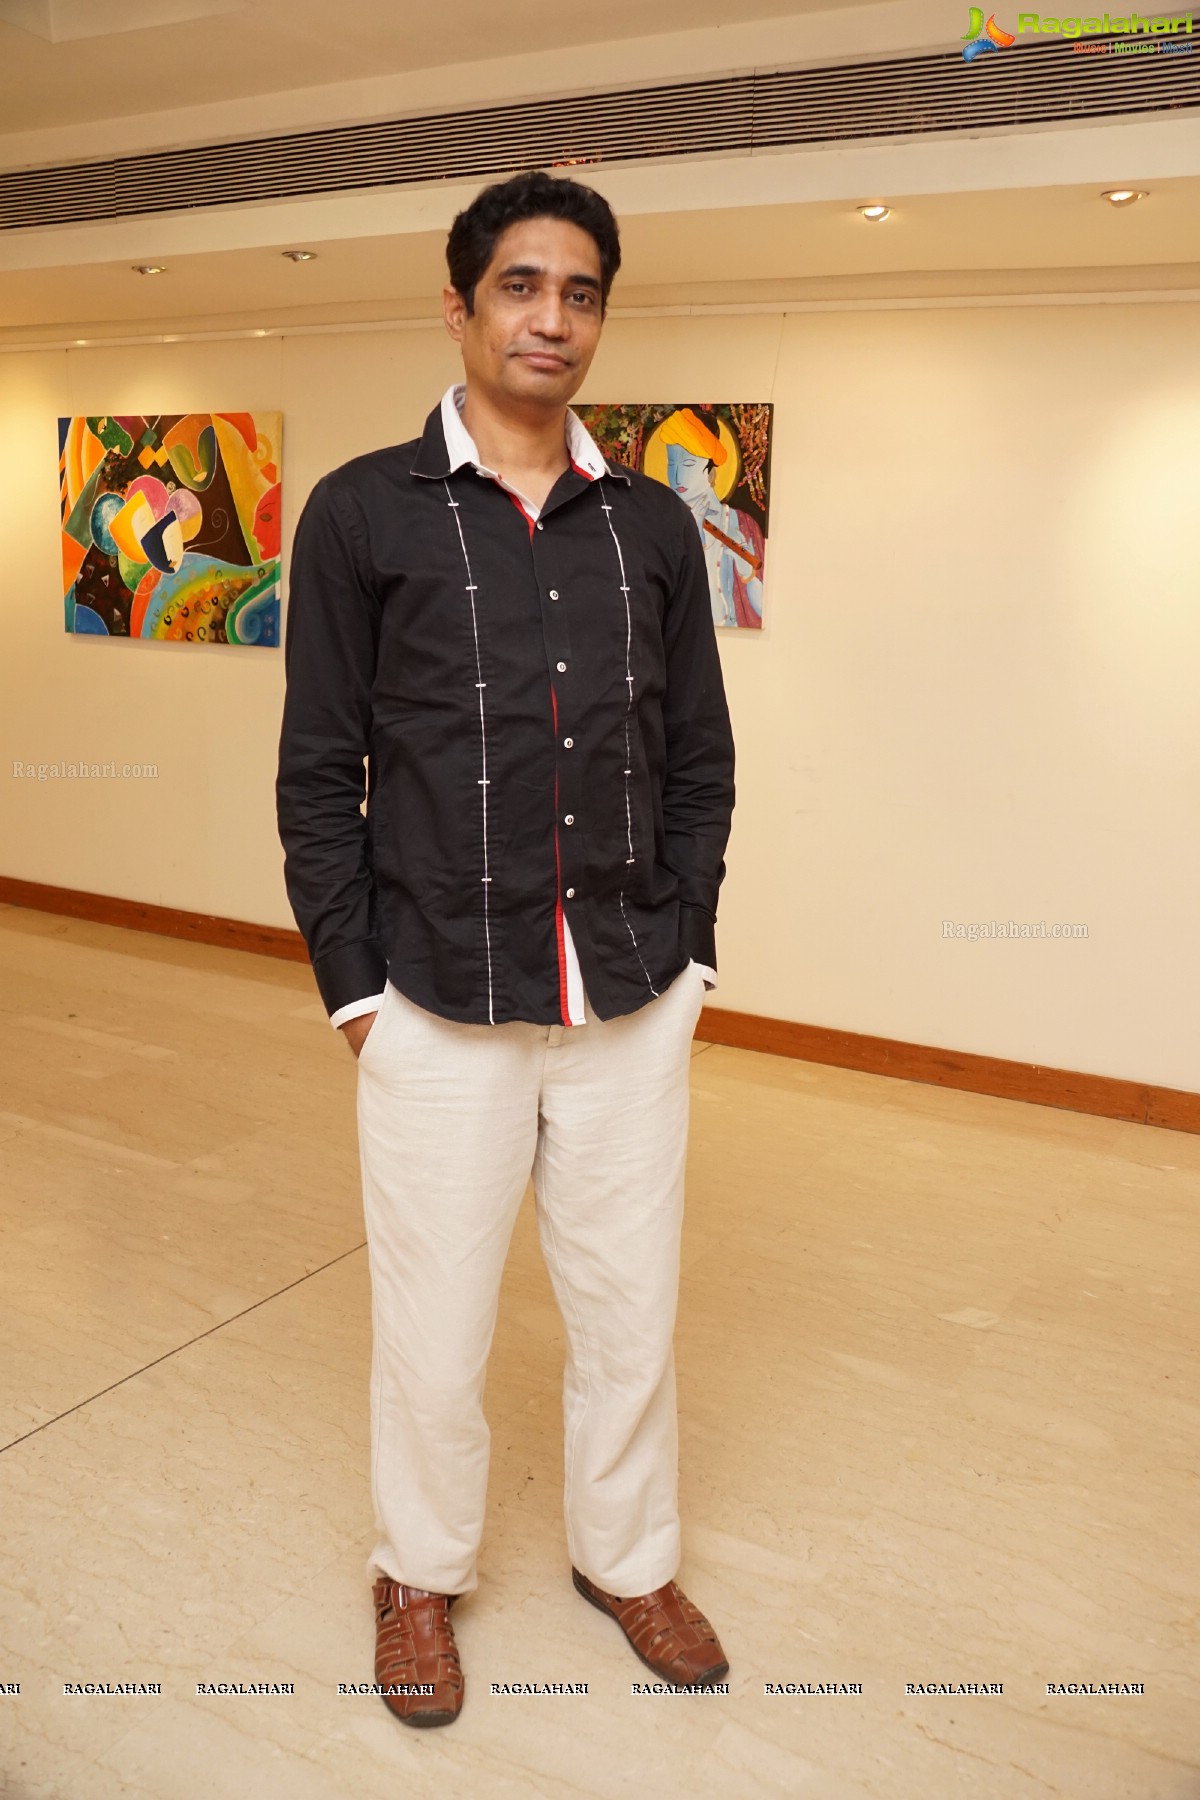 The Mask - Painting Exhibition at Muse Art Gallery, Hyderabad